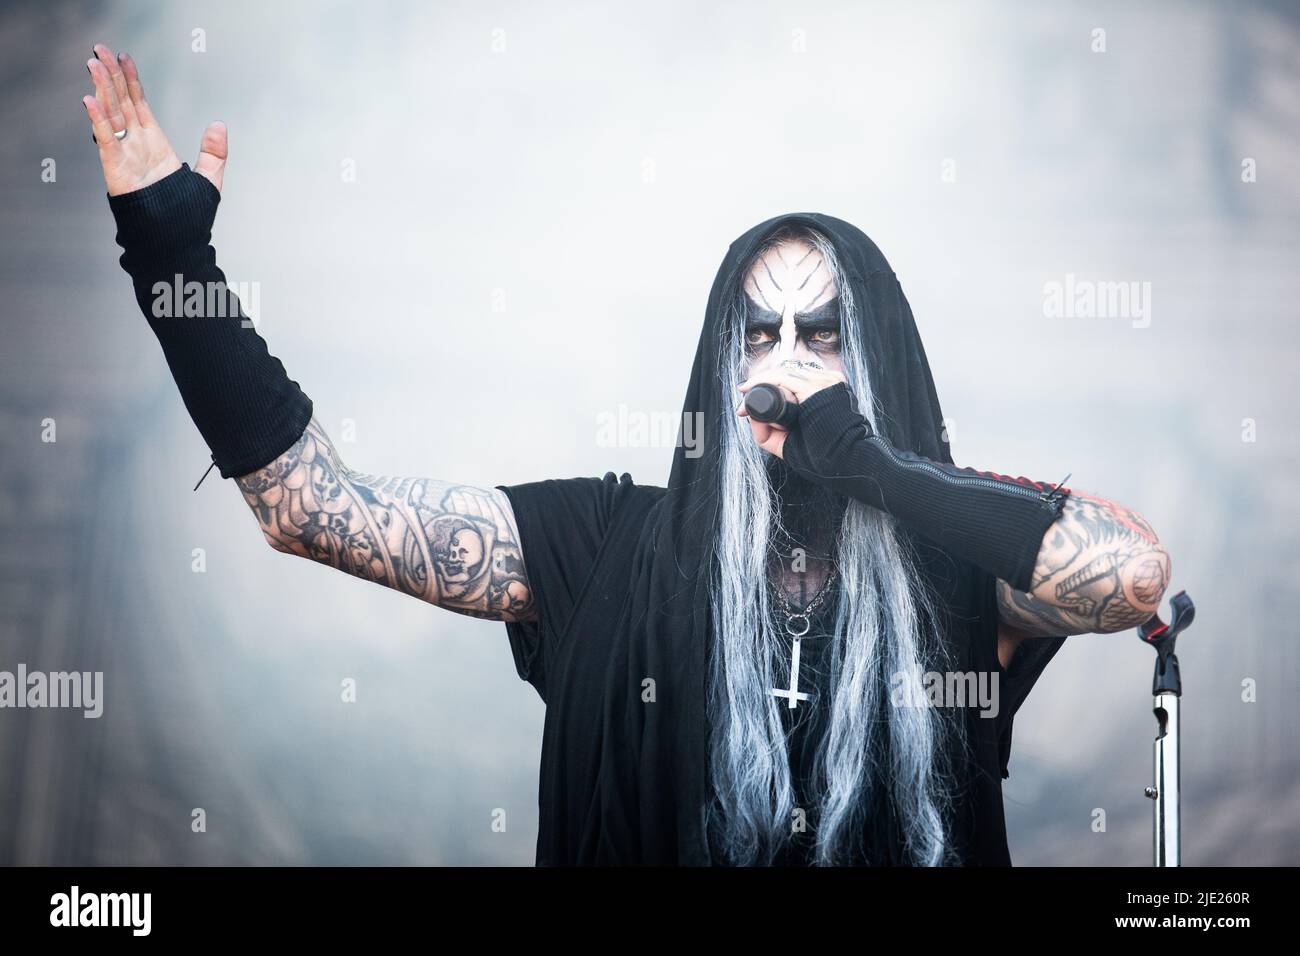 Shagrath of Norwegian metal band Dimmu Borgir performs on stage as News  Photo - Getty Images